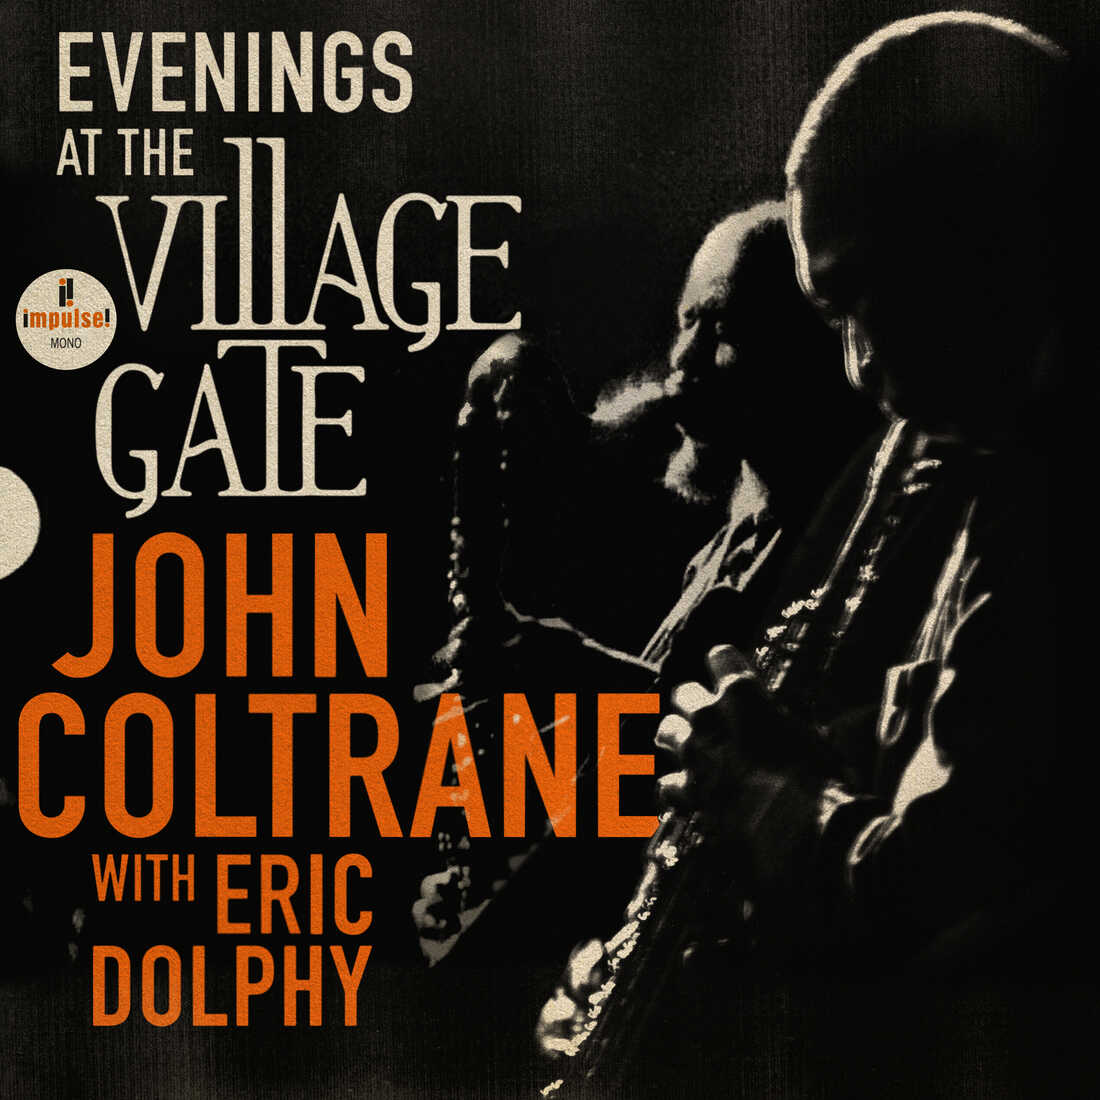 Evenings at the Village Gate by John Coltrane with Eric Dolphy